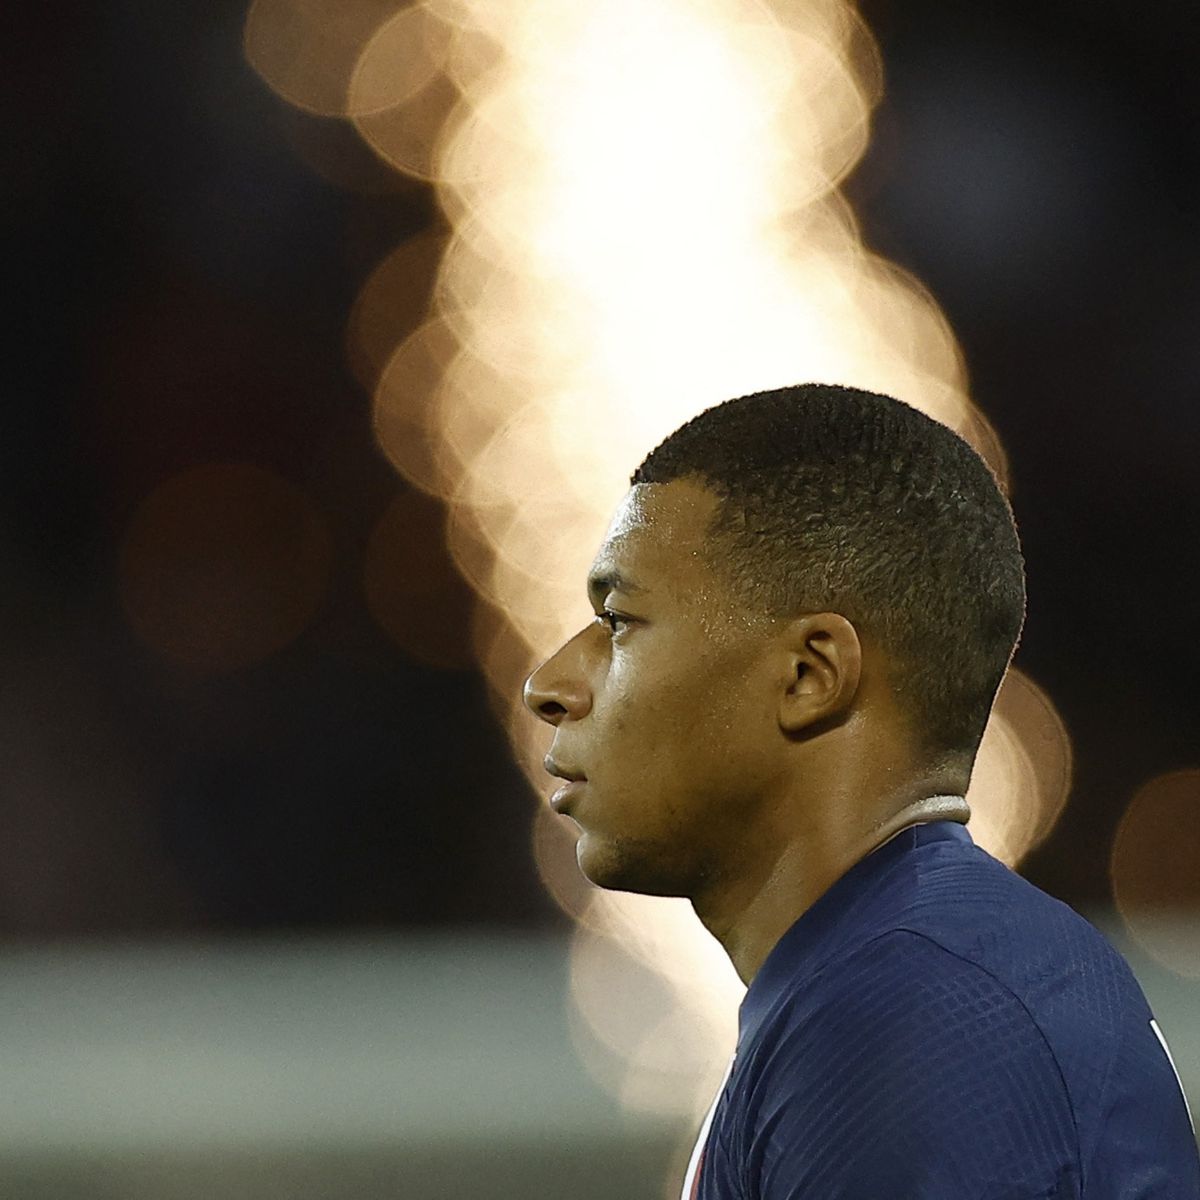 Kylian Mbappe tops Forbes' football rich list for first time, above